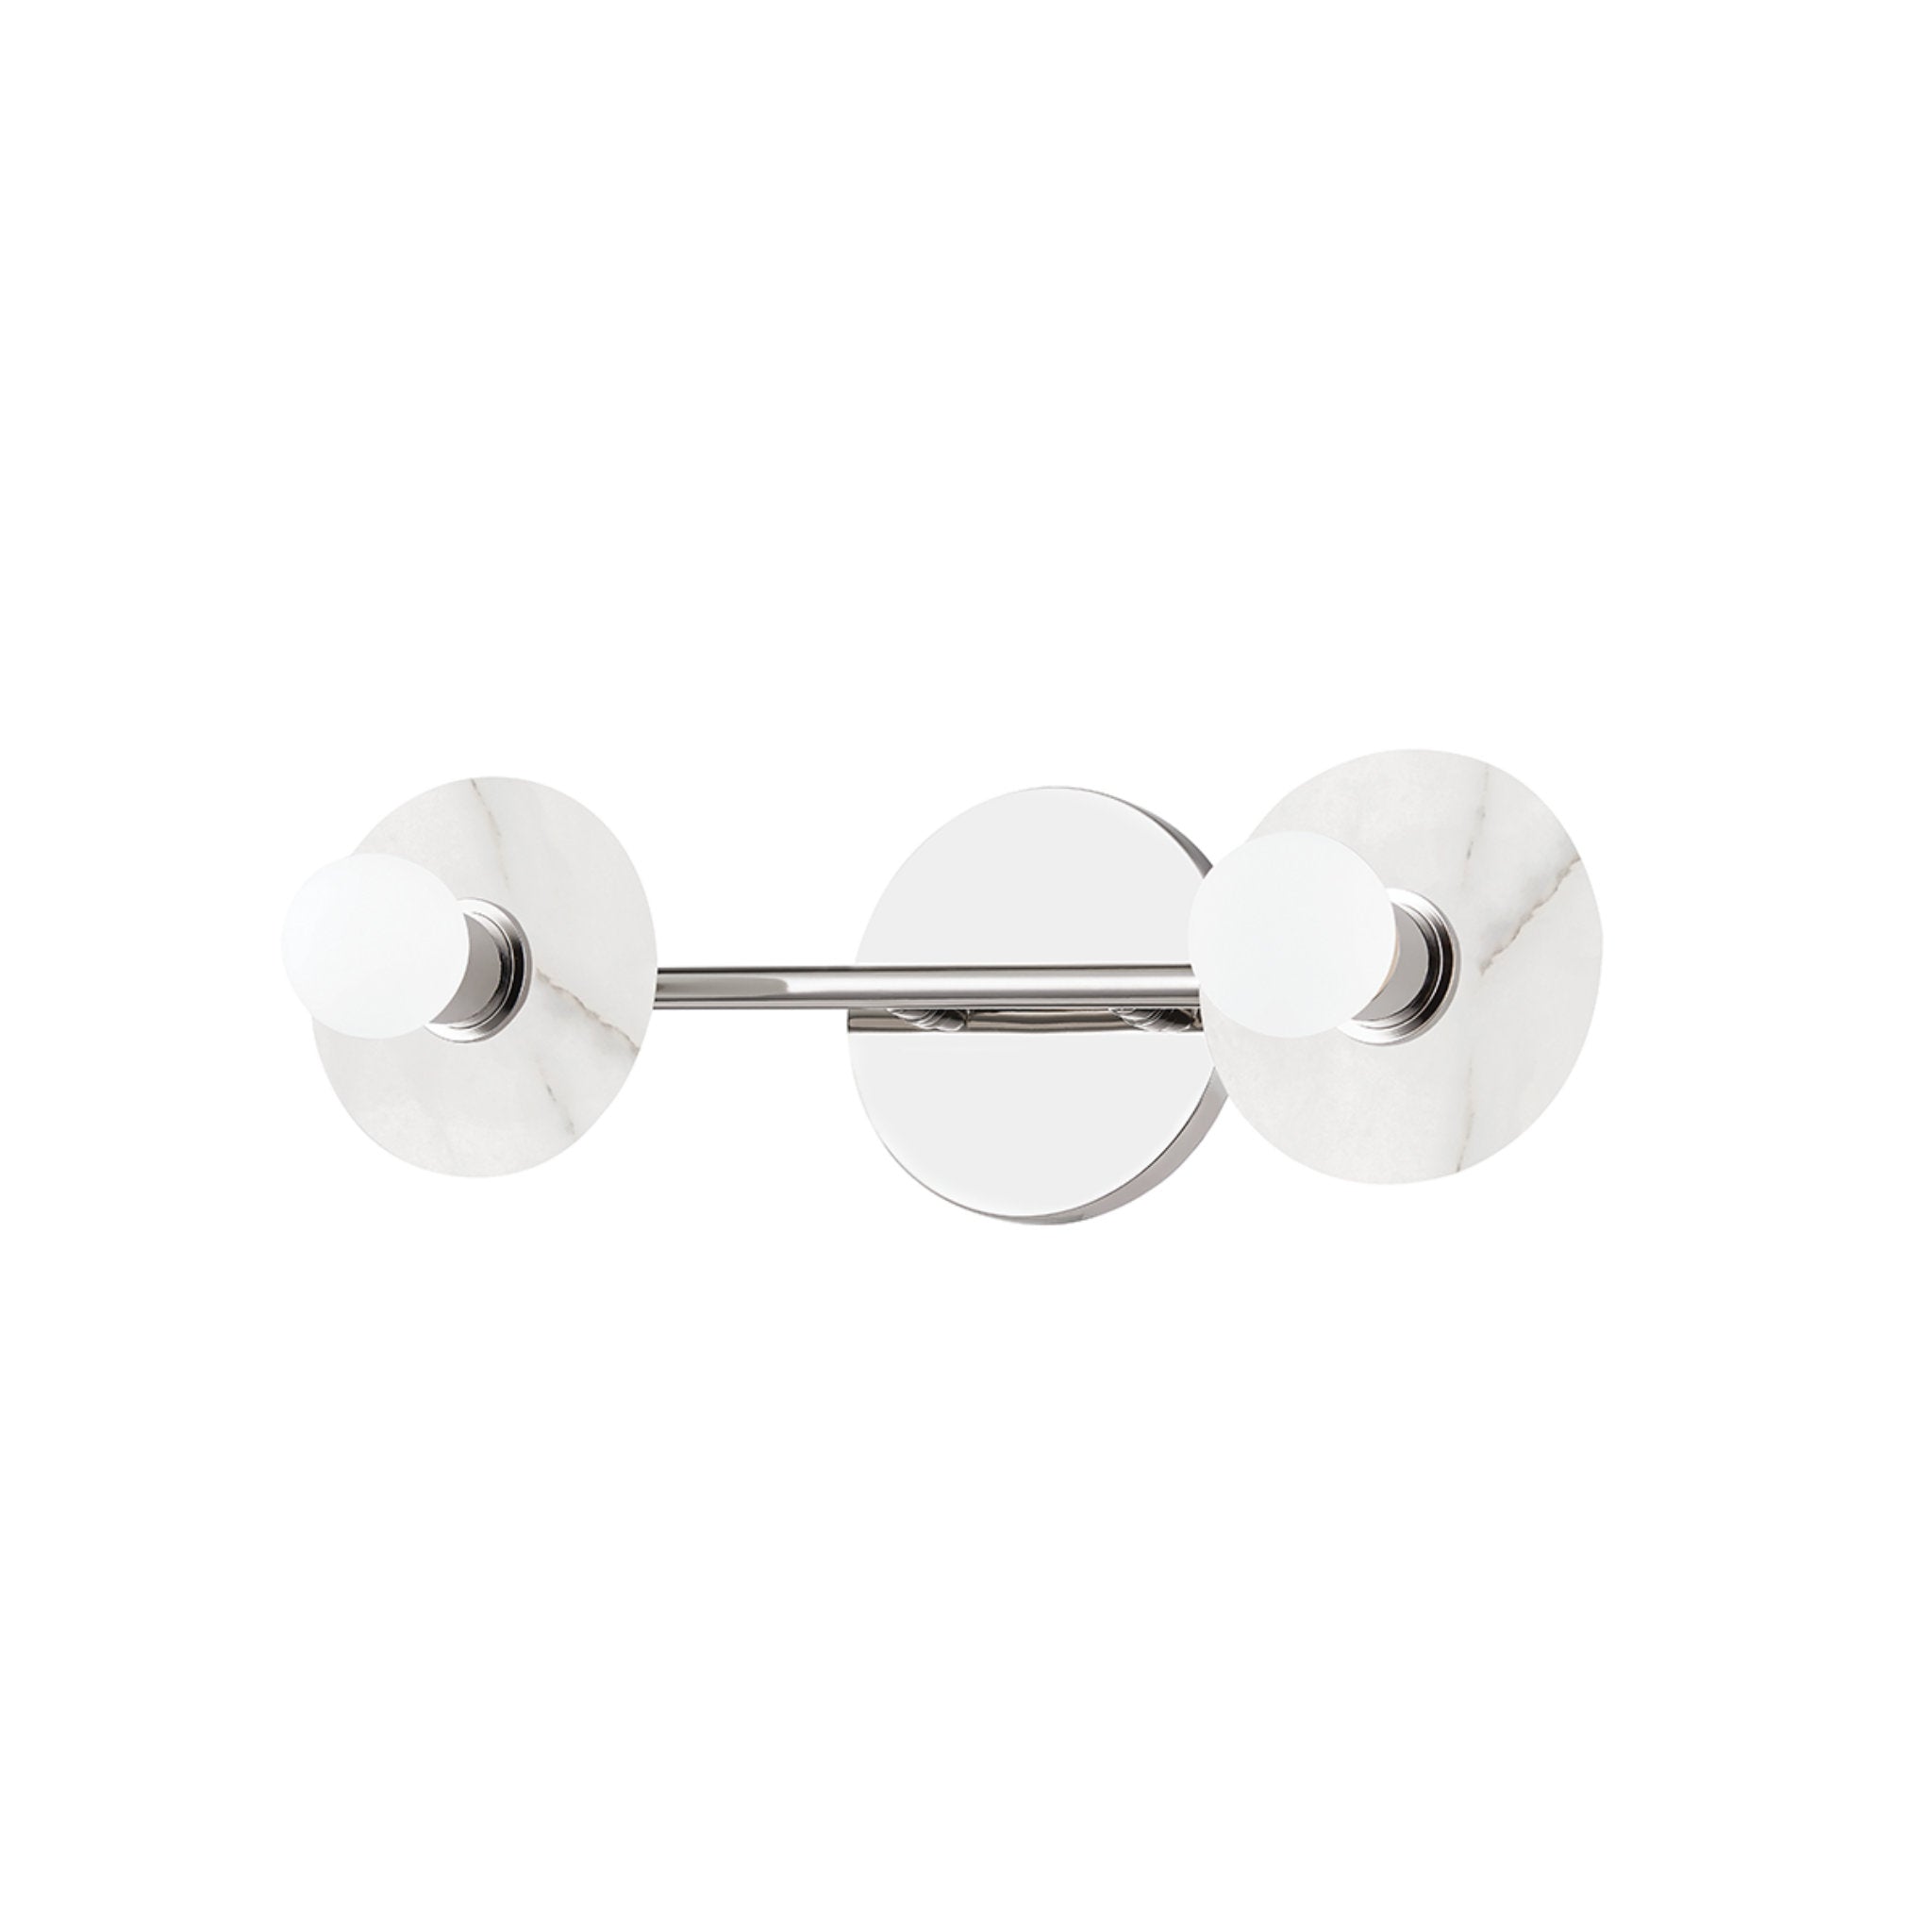 Elmont 2 Light Bath and Vanity in Polished Nickel